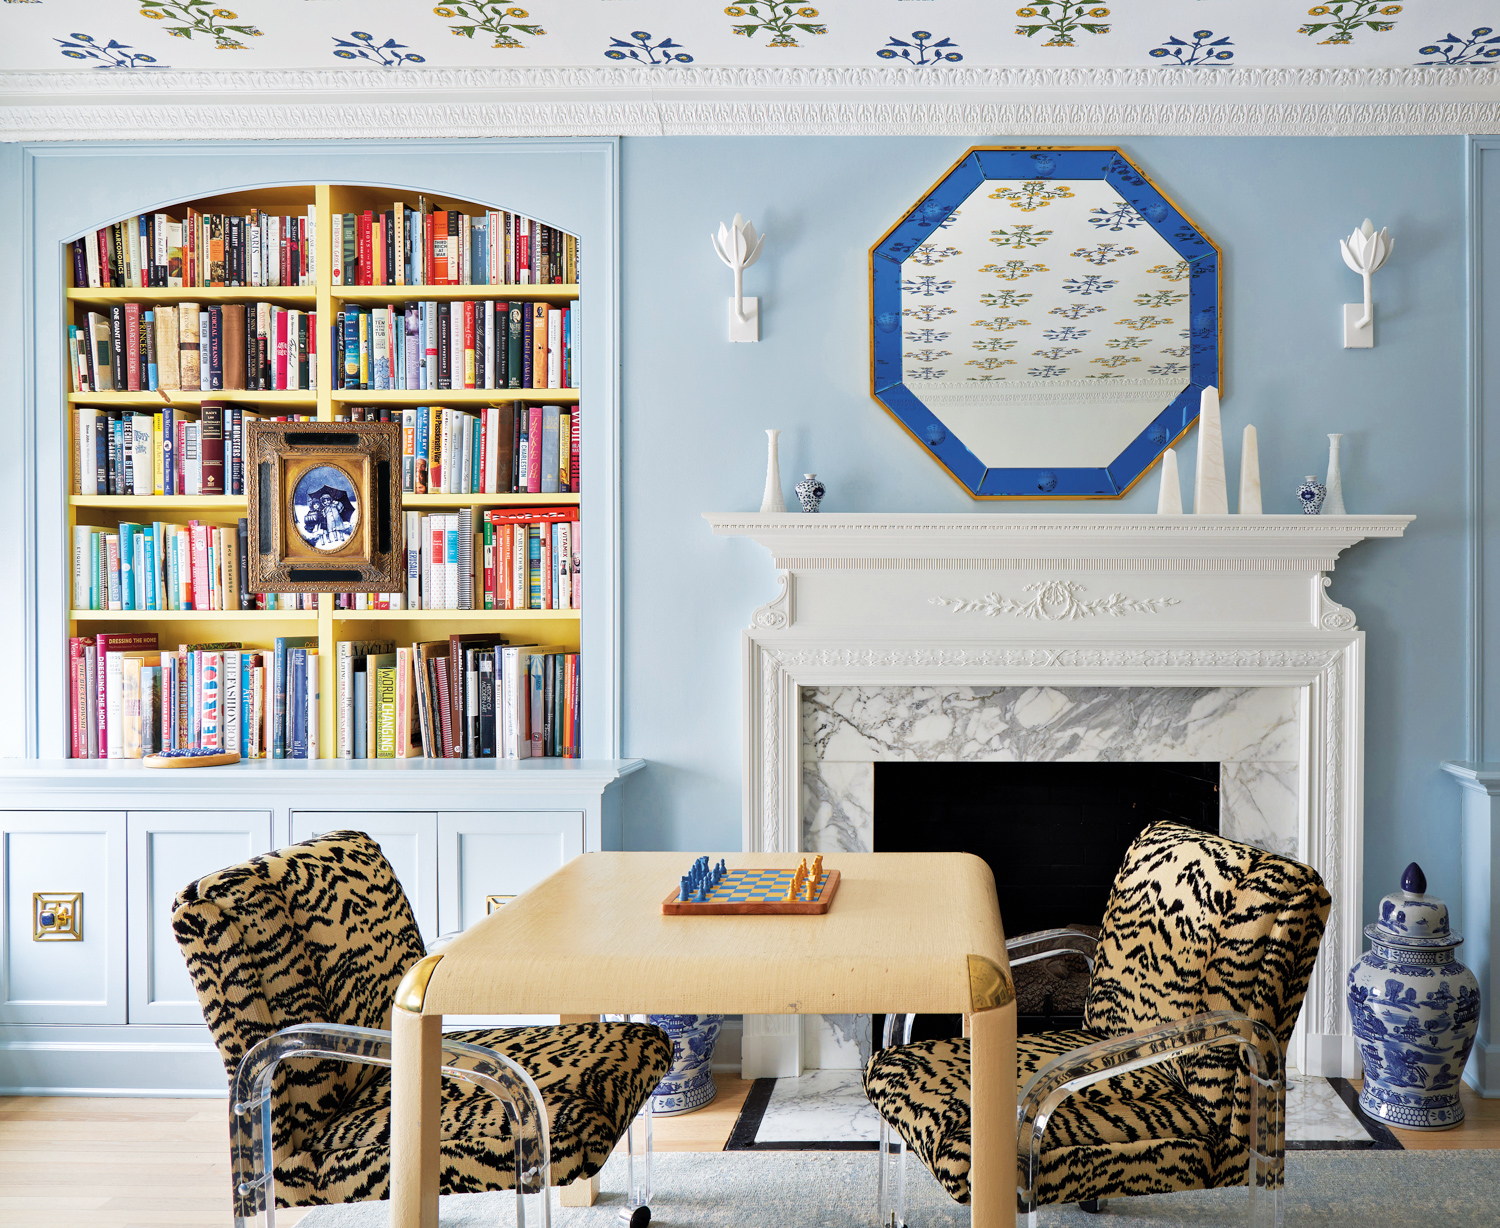 Leopard-print armchairs and a wood table in front of a marble fireplace and bookshelves by Jasmin Reese